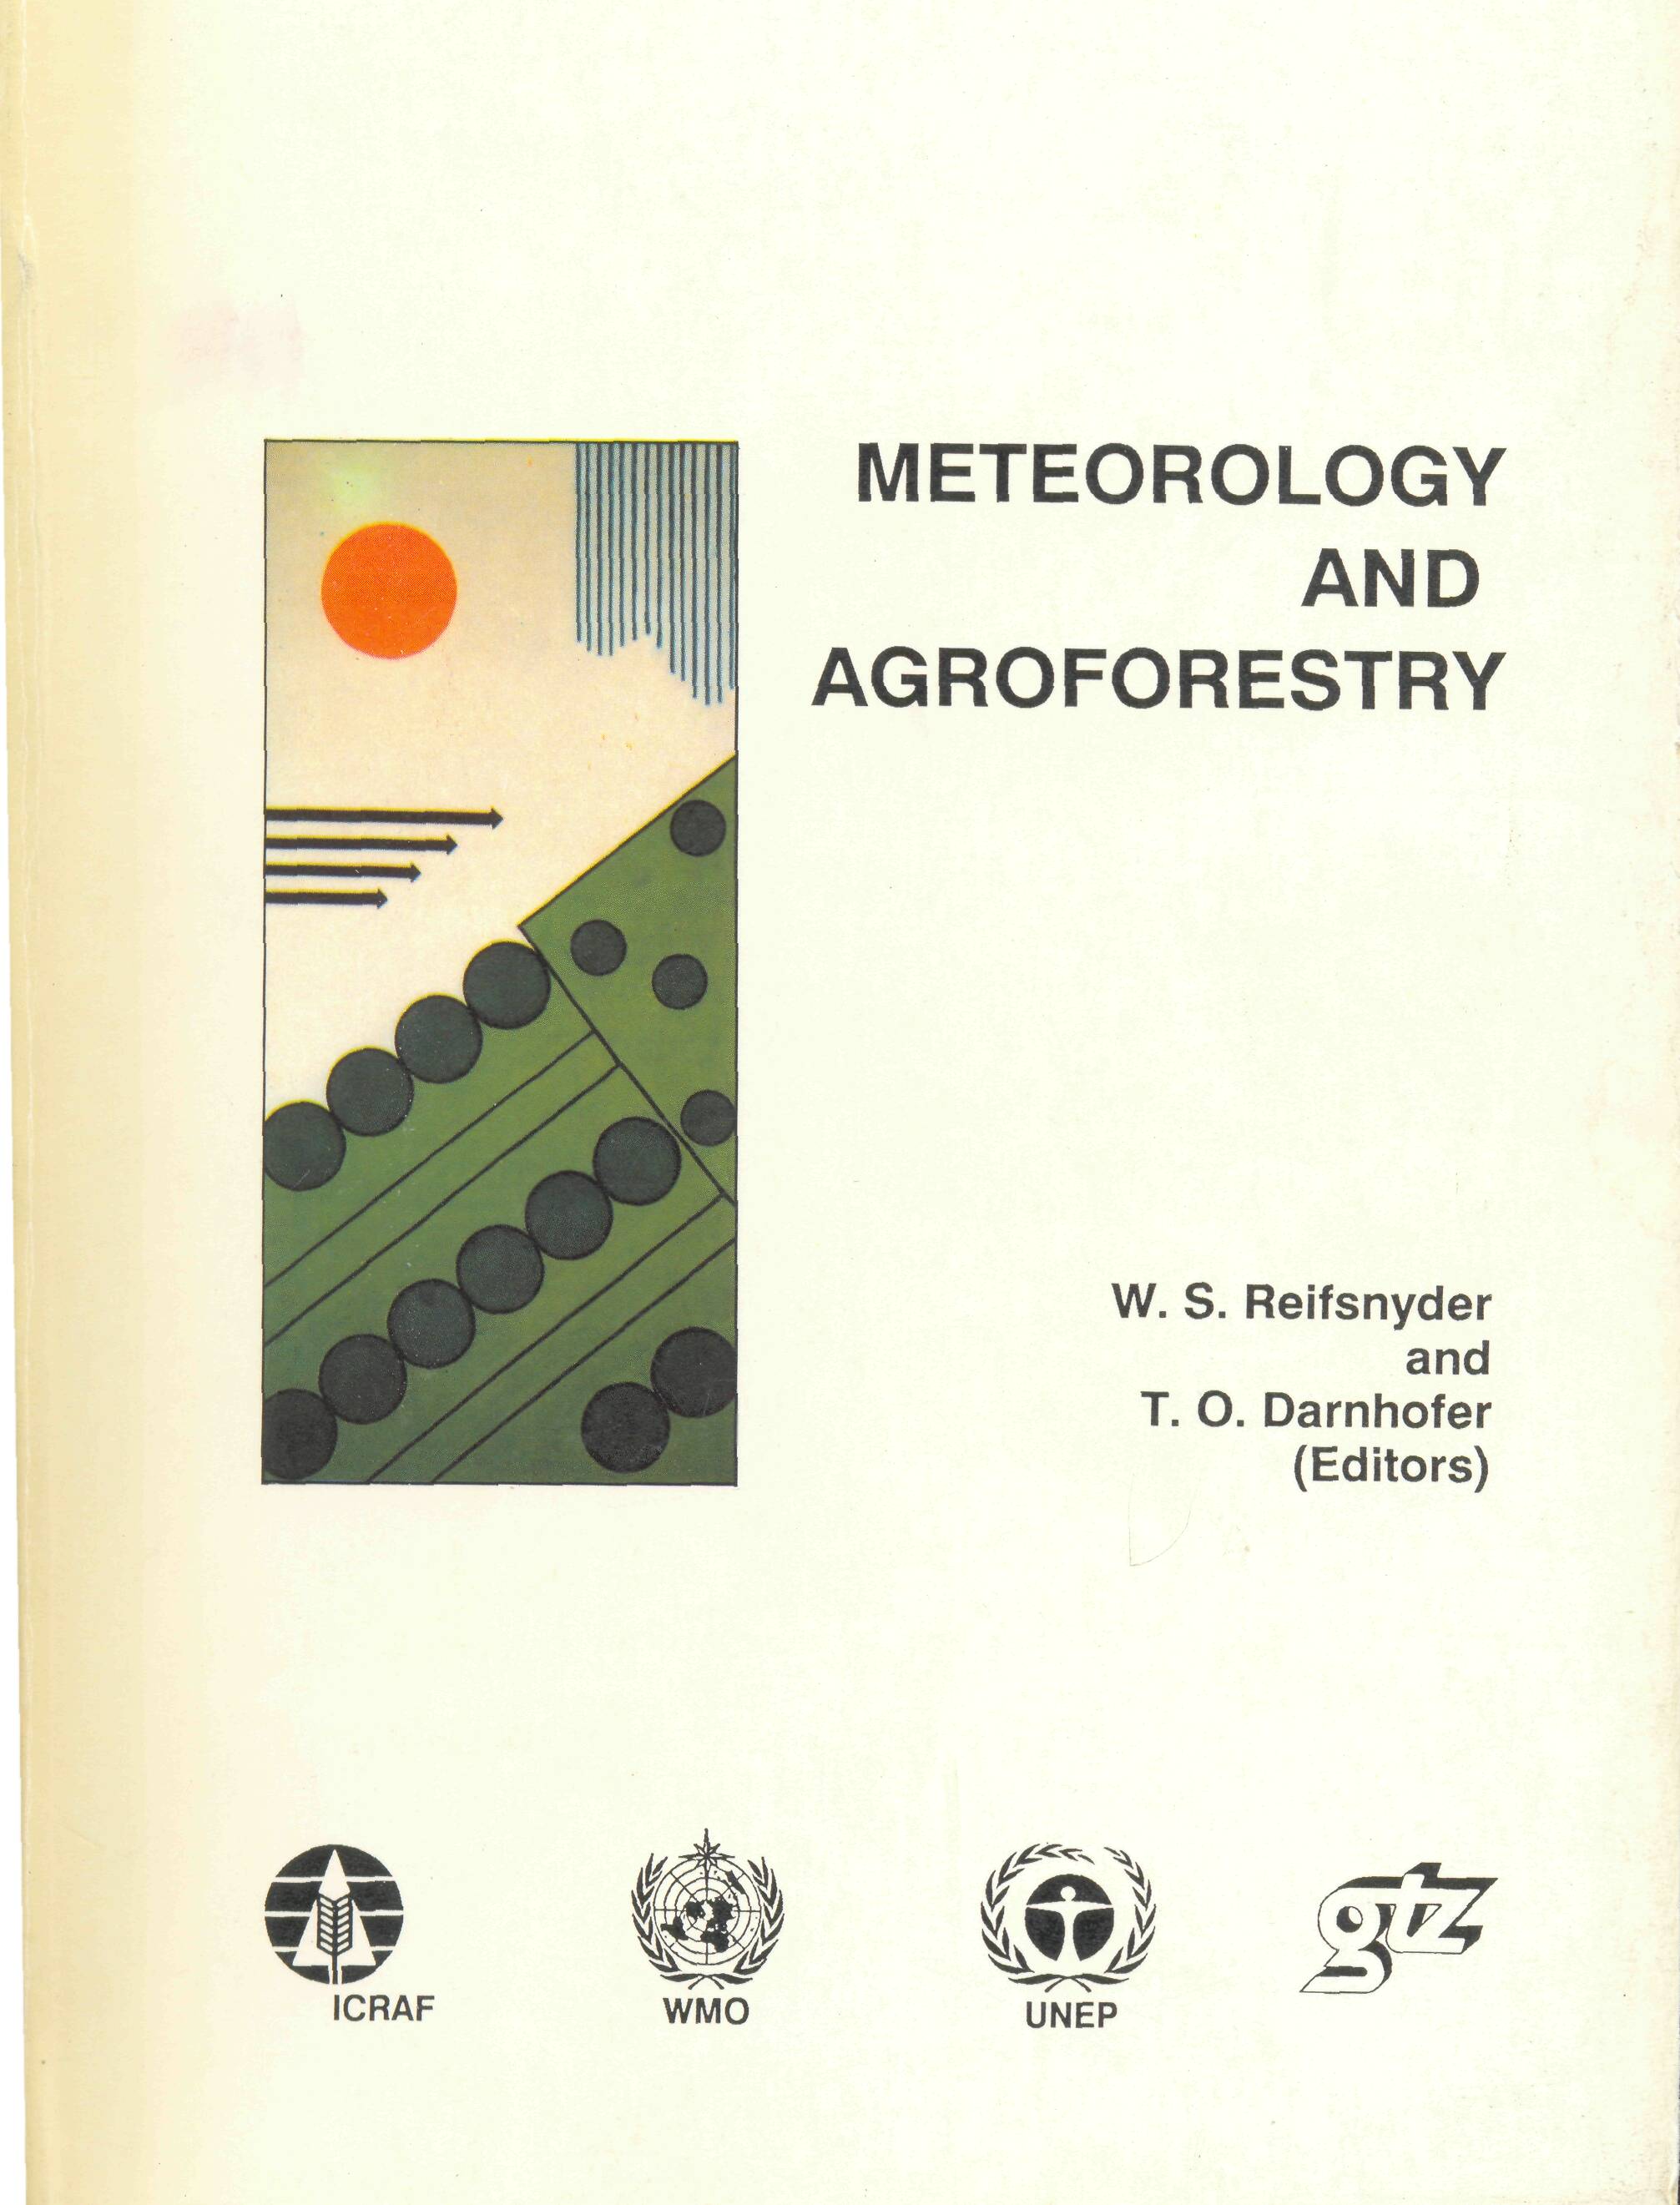 METEOROLOGY AND AGROFORESTRY
